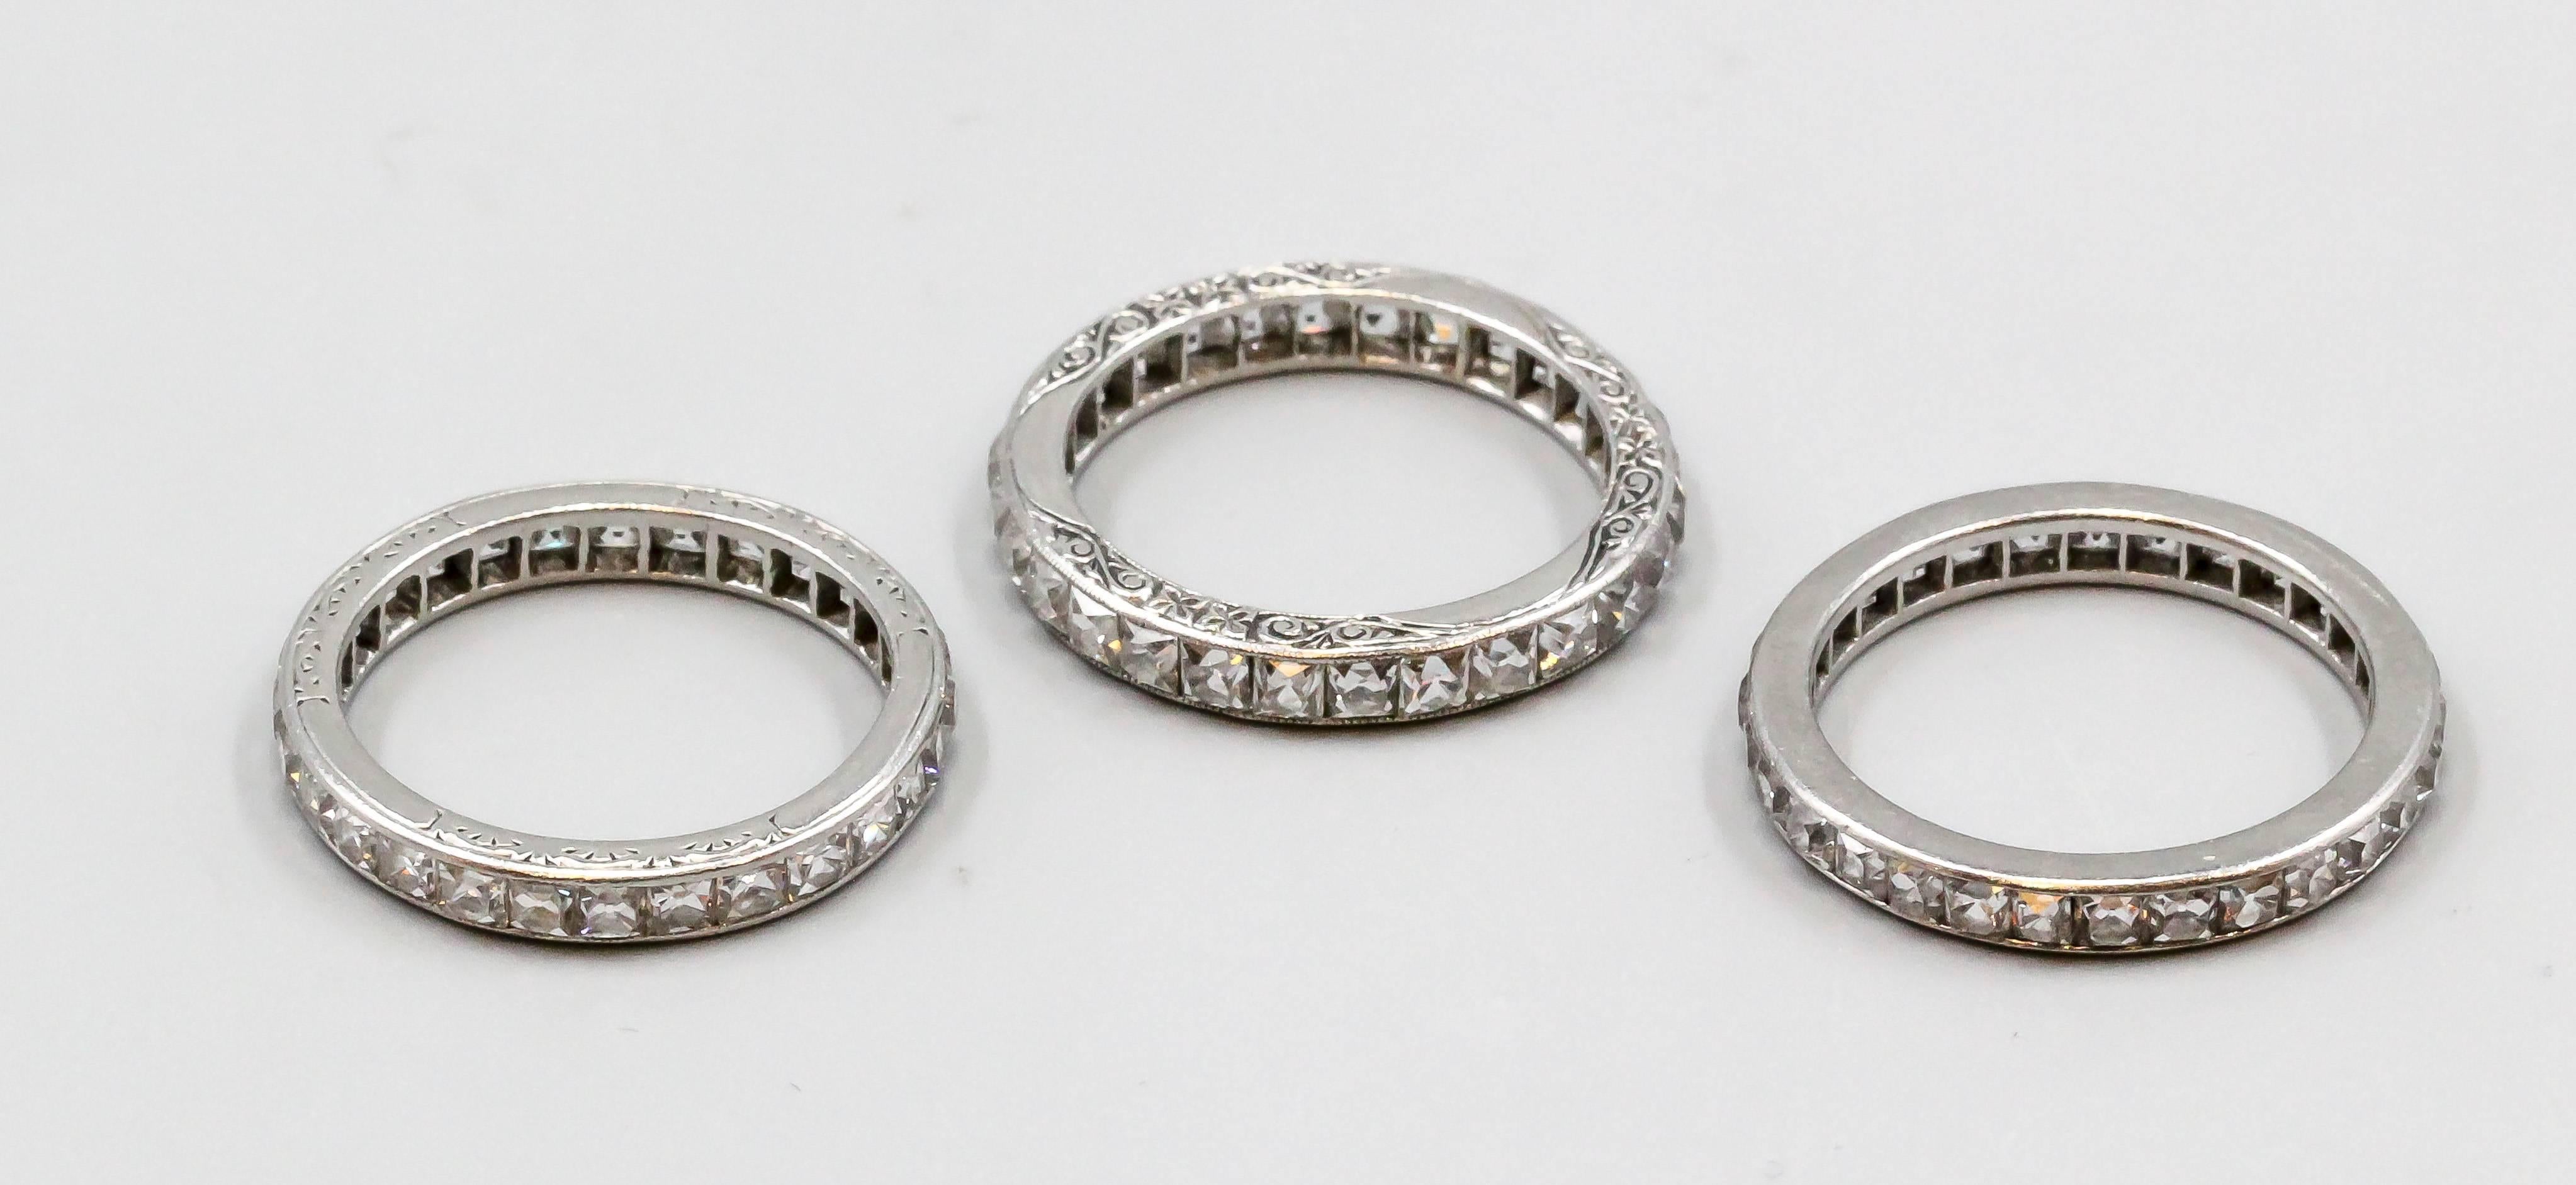 Rare set of three Art Deco era diamond and platinum band set. They feature good quality French cut diamonds within each band, with platinum setting. The two "outer" bands have period carvings in the platinum. Beautiful matching set with